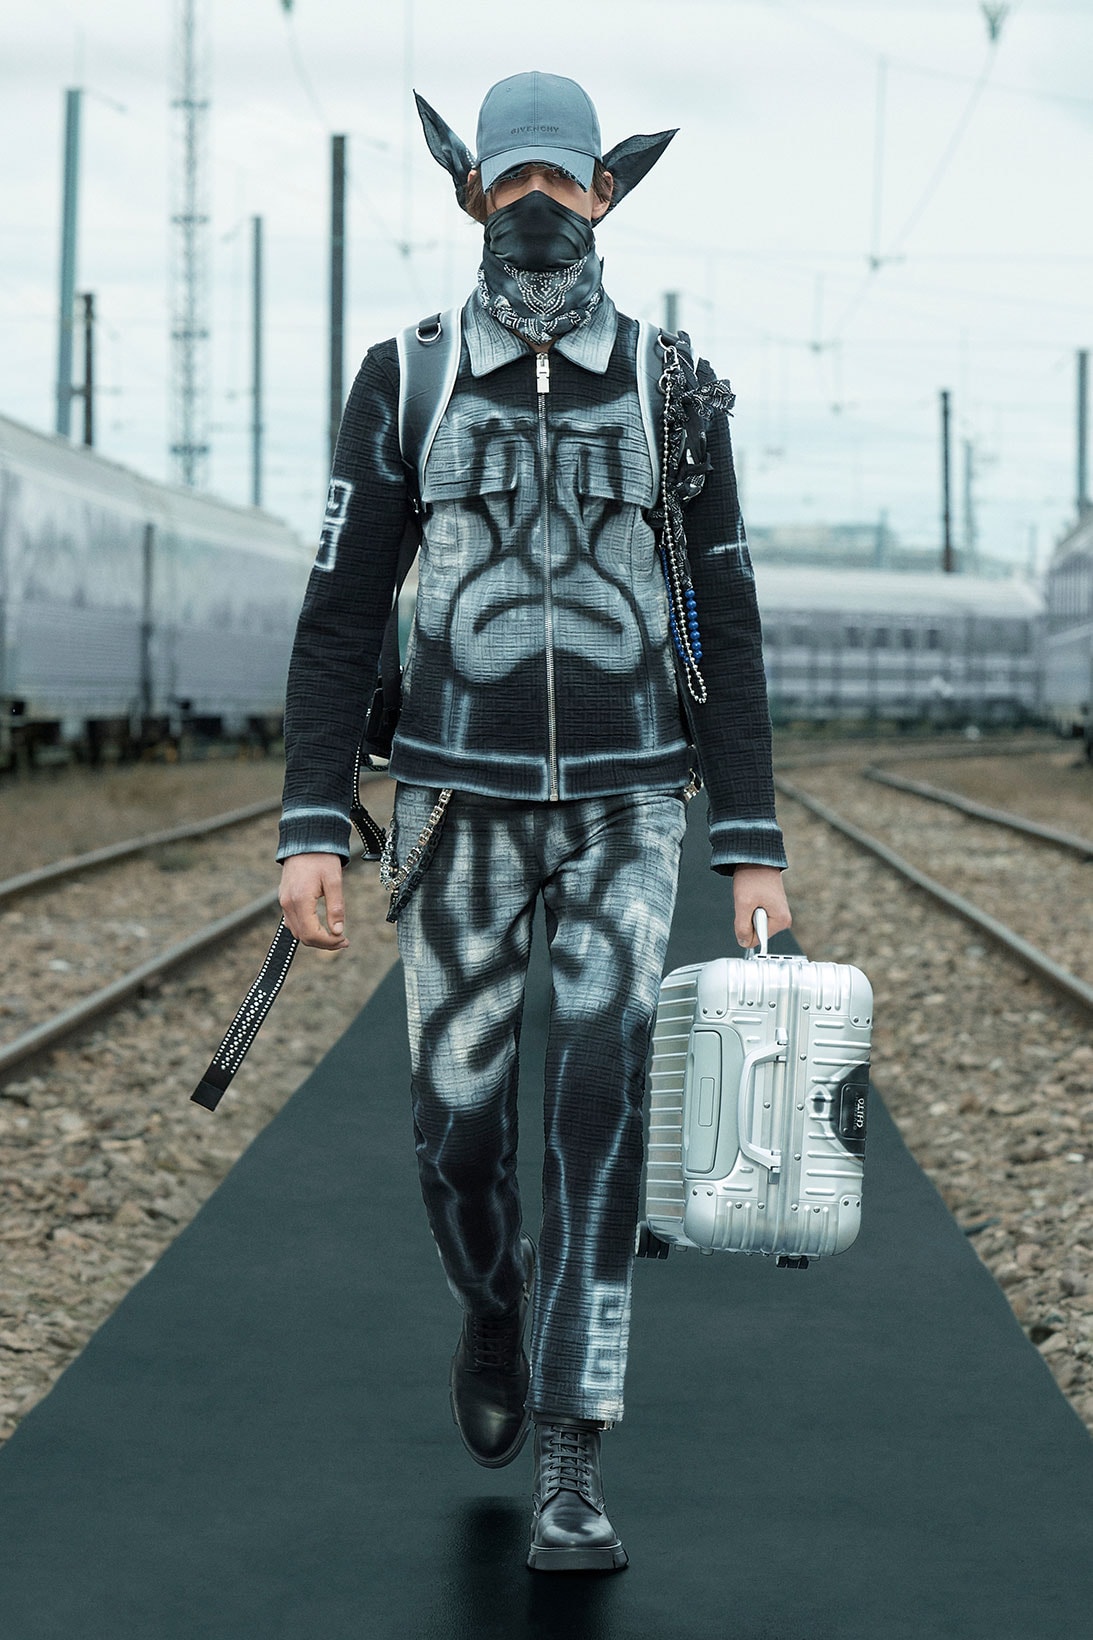 givenchy spring 2022 resort precollection matthew m williams rimowa graphic artist chito runway watch release date airbrush graffiti print 